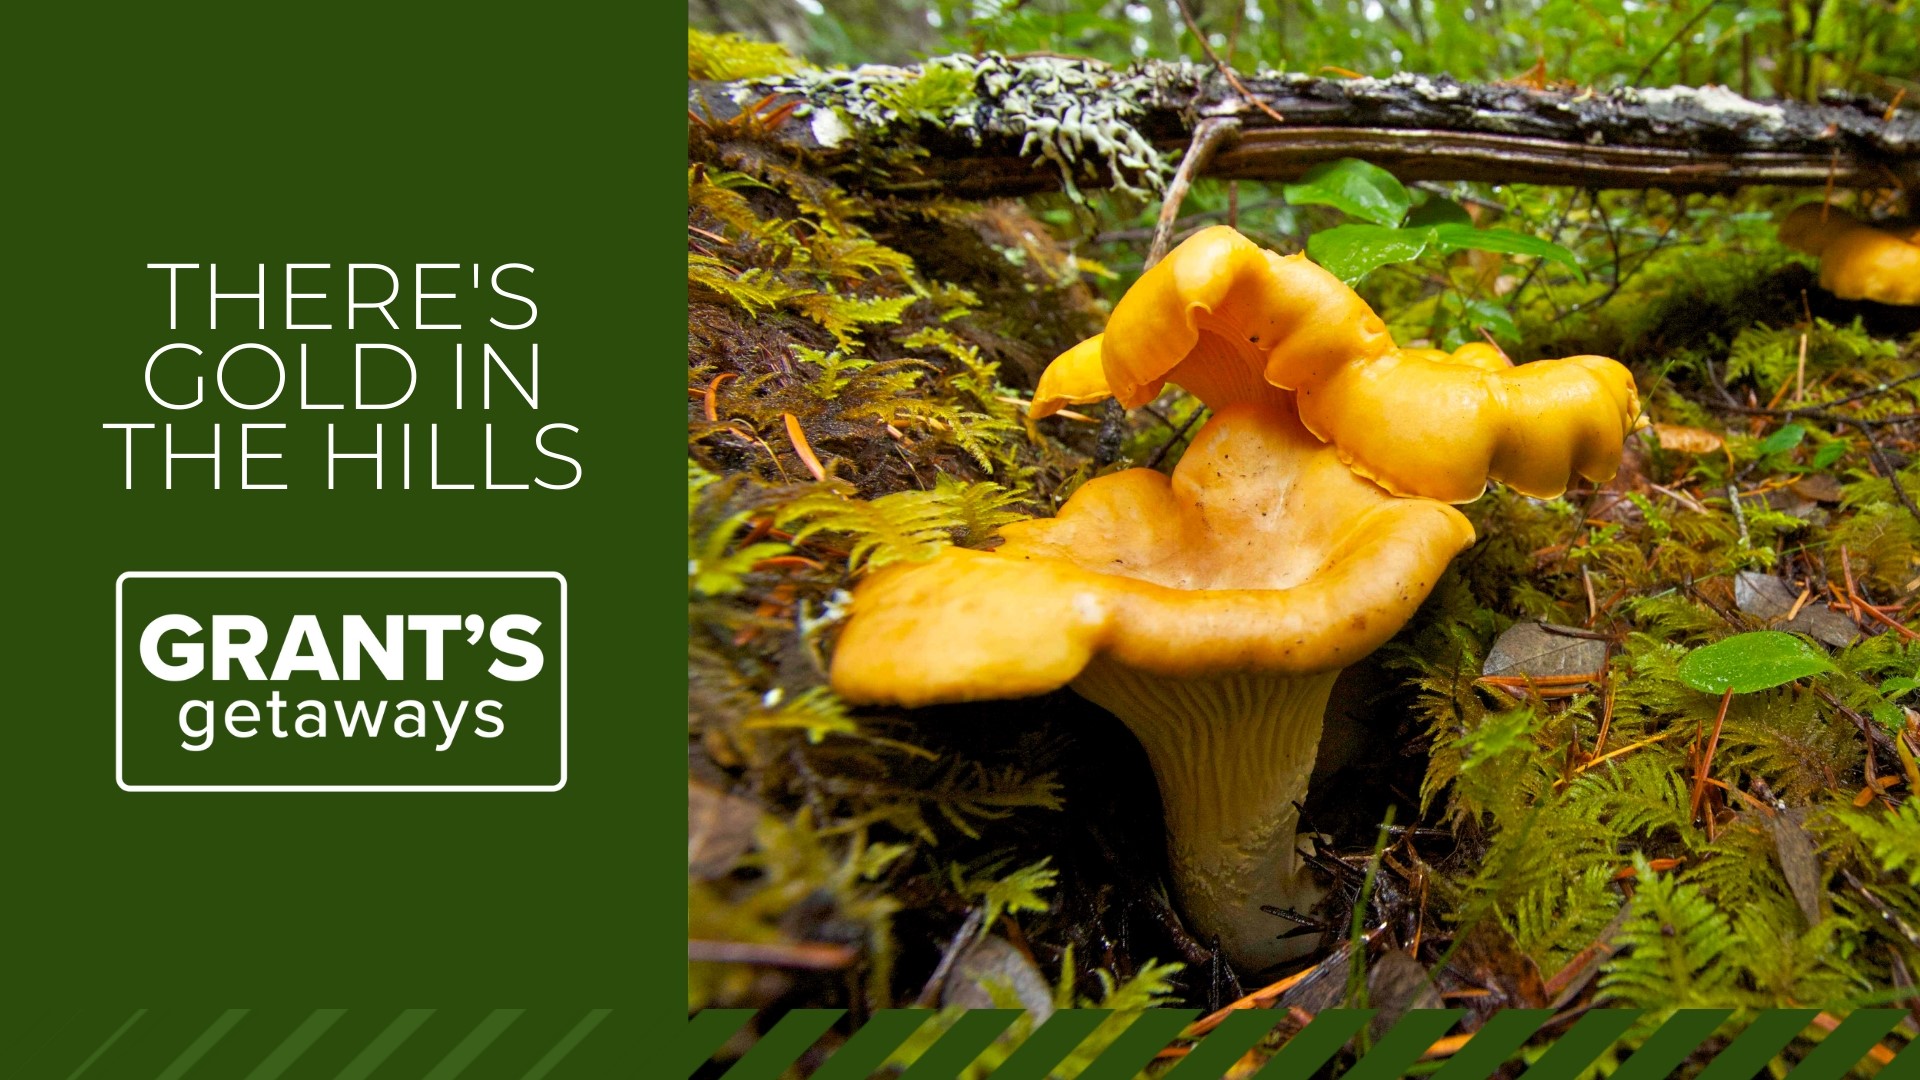 There is a new shout-out for the season: there’s gold in the hills! Not the metal kind but a culinary delight as the golden chanterelle mushroom season gets underway